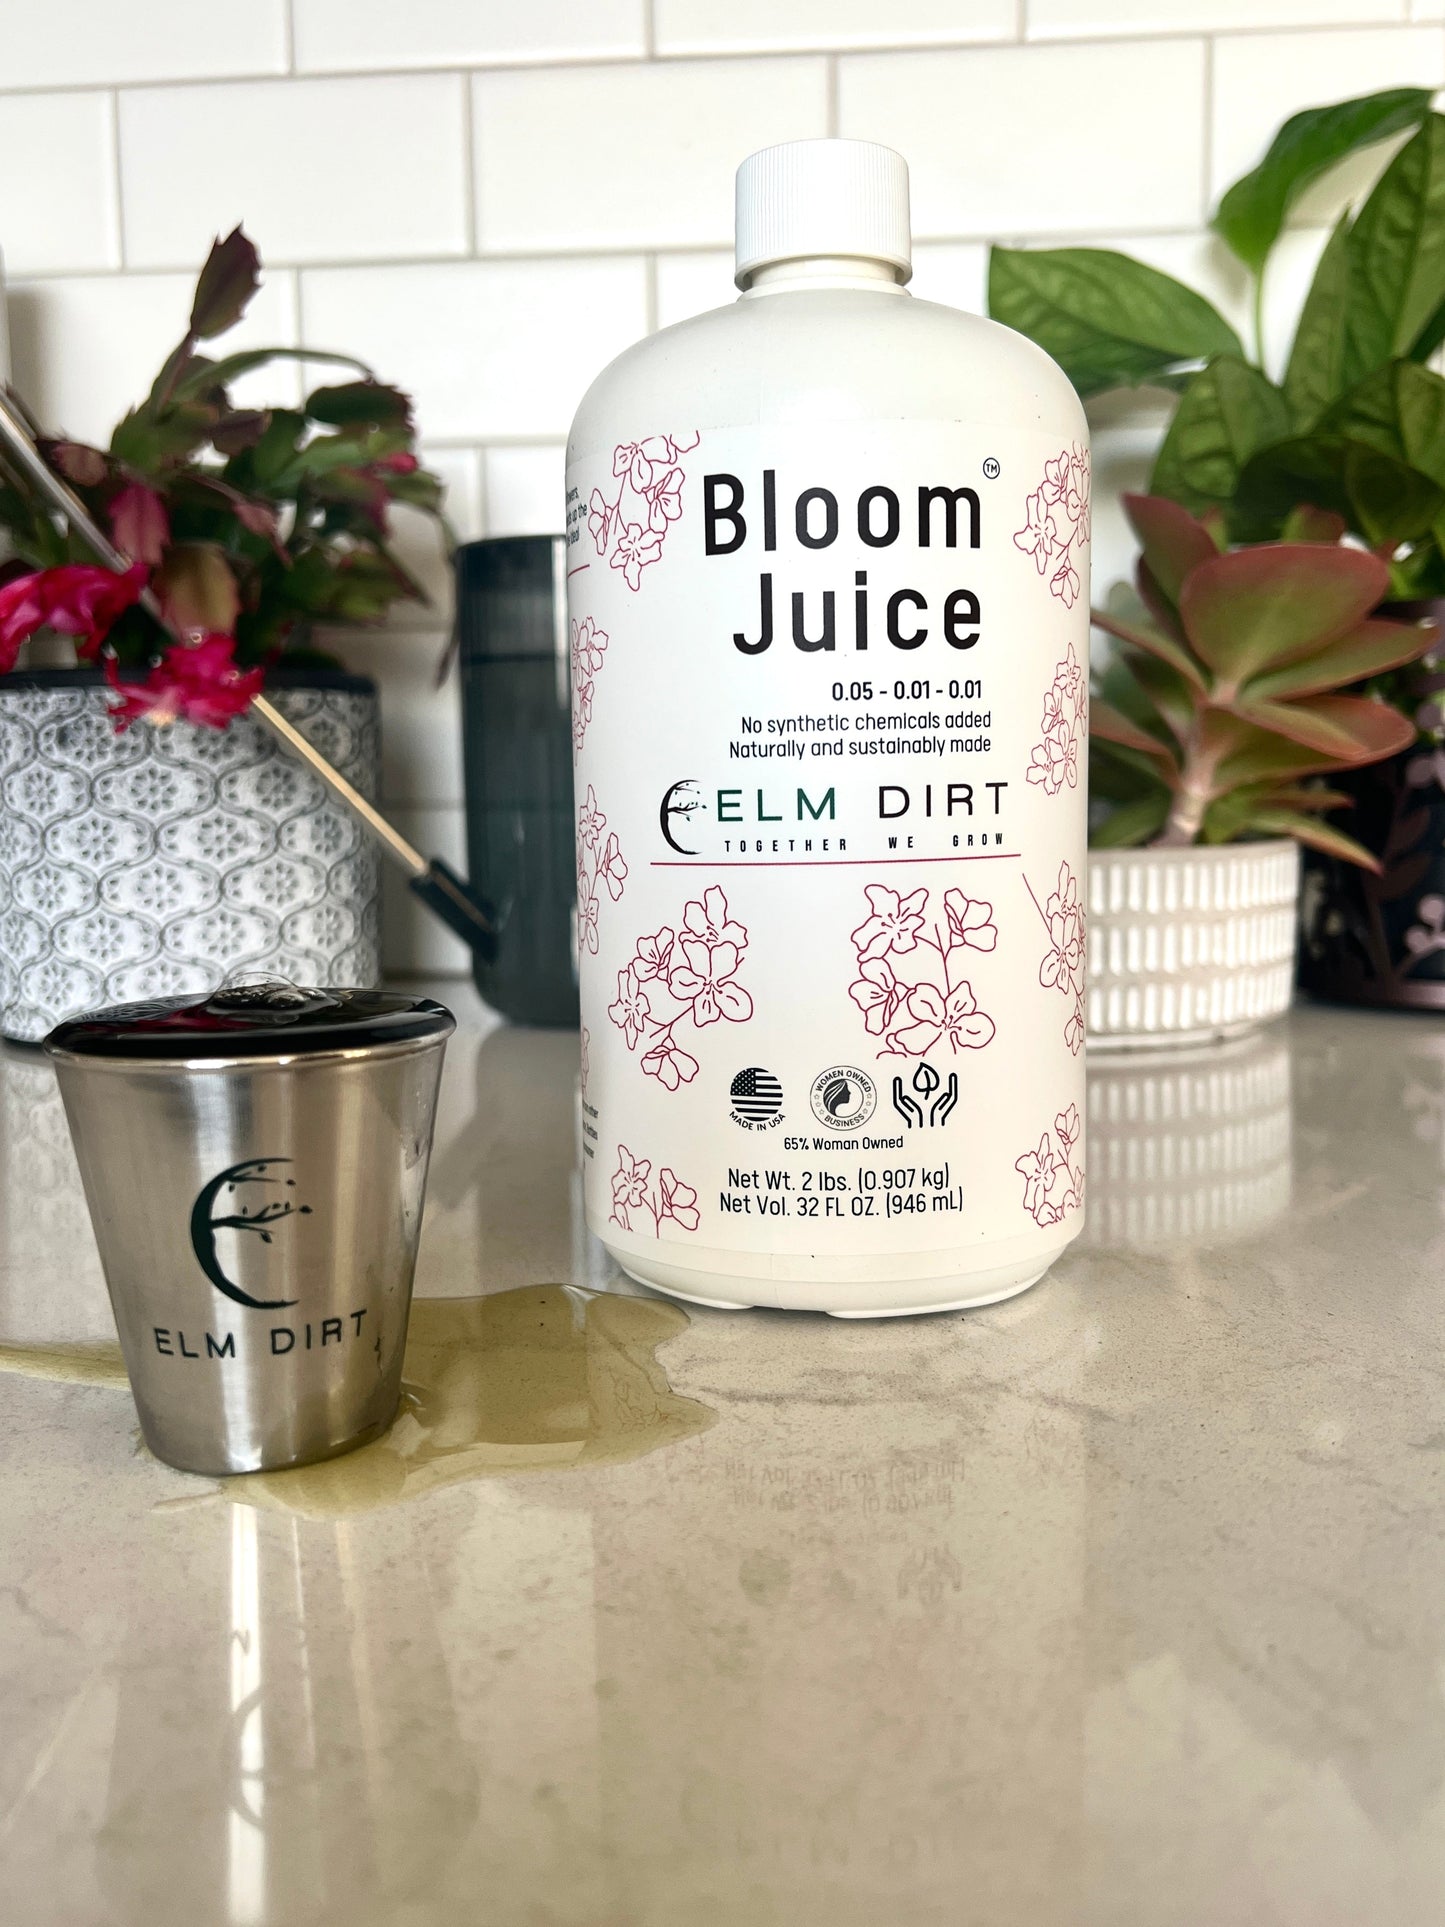 Bloom Juice by Elm Dirt - Lotus and Willow